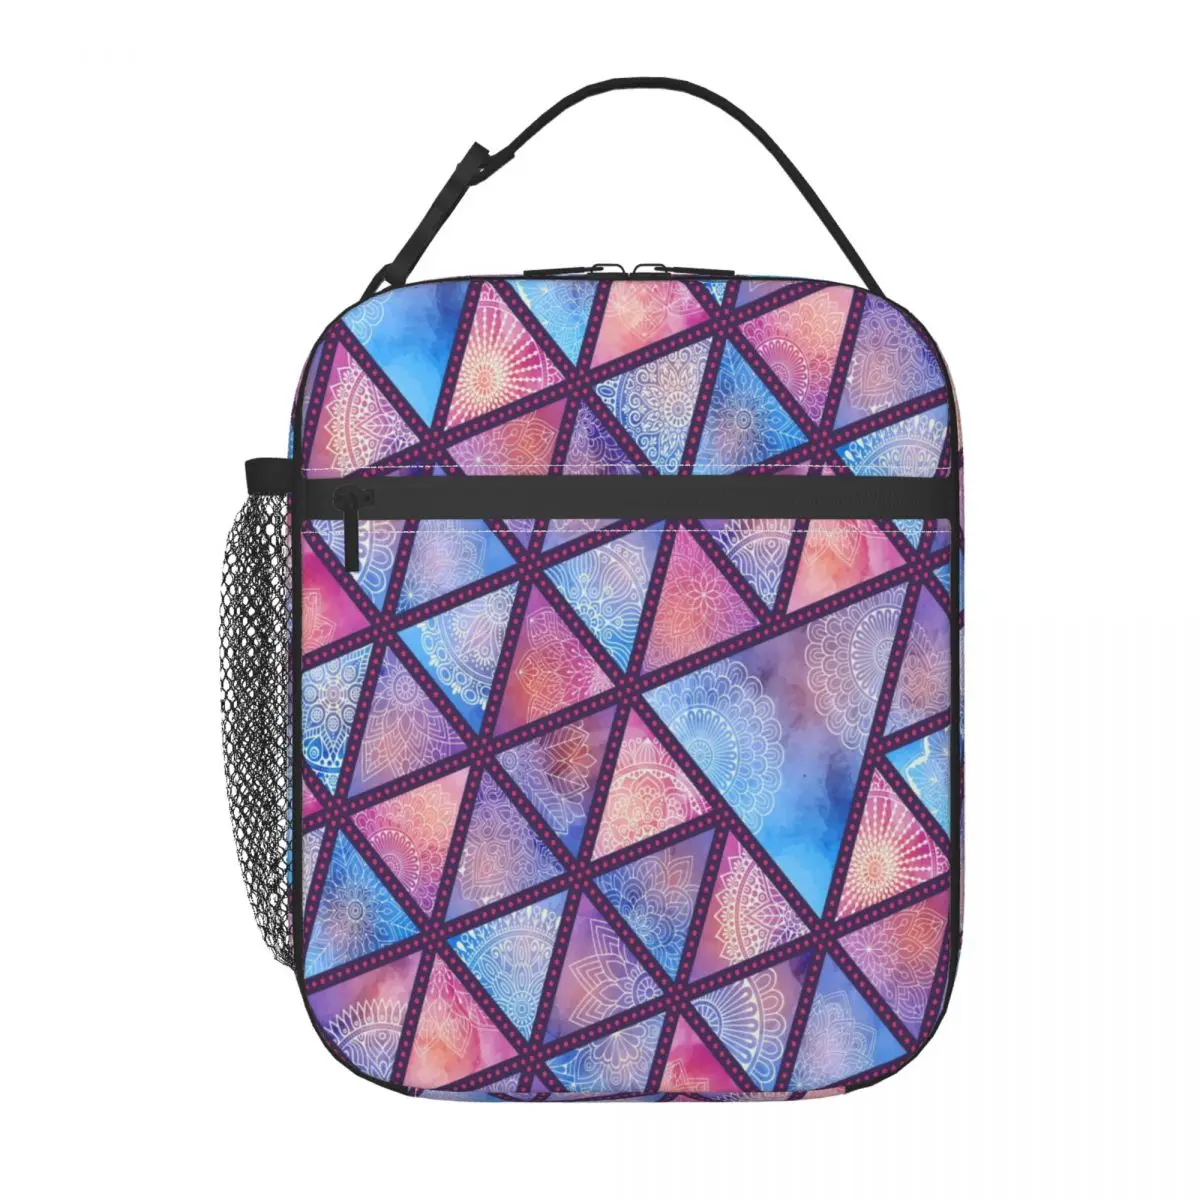 

Ethnic Floral With Triangles Insulated Thermal Cooler Lunch Box Bag For Work Picnic Bag Car Bolsa Refrigerator Portable Bag